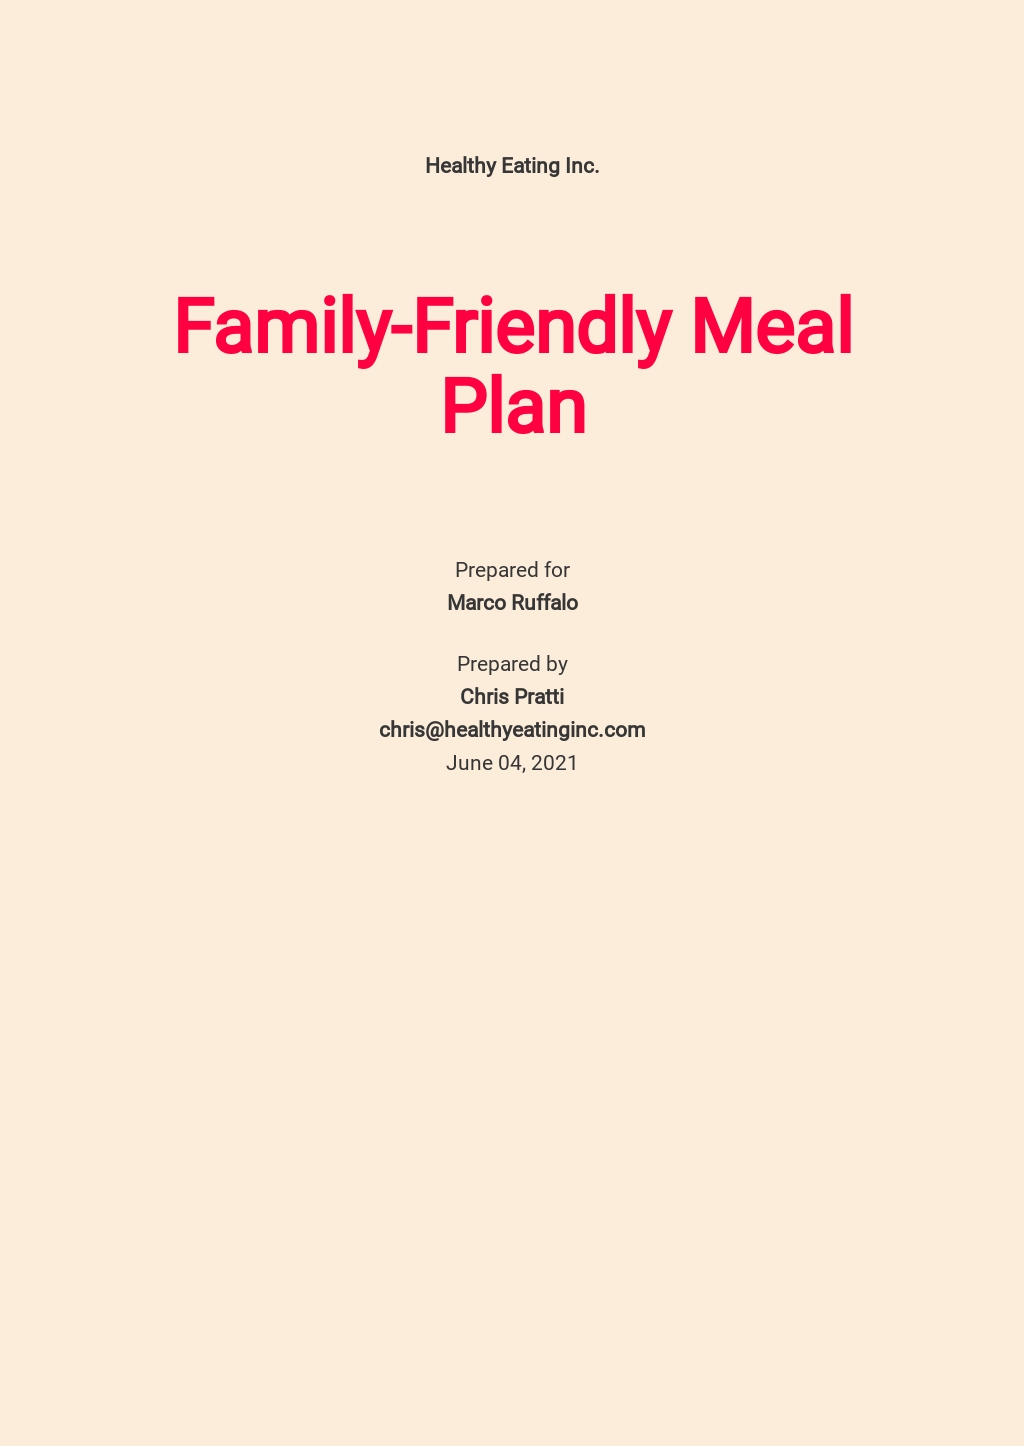 FREE Meal Plan Templates in Google Docs